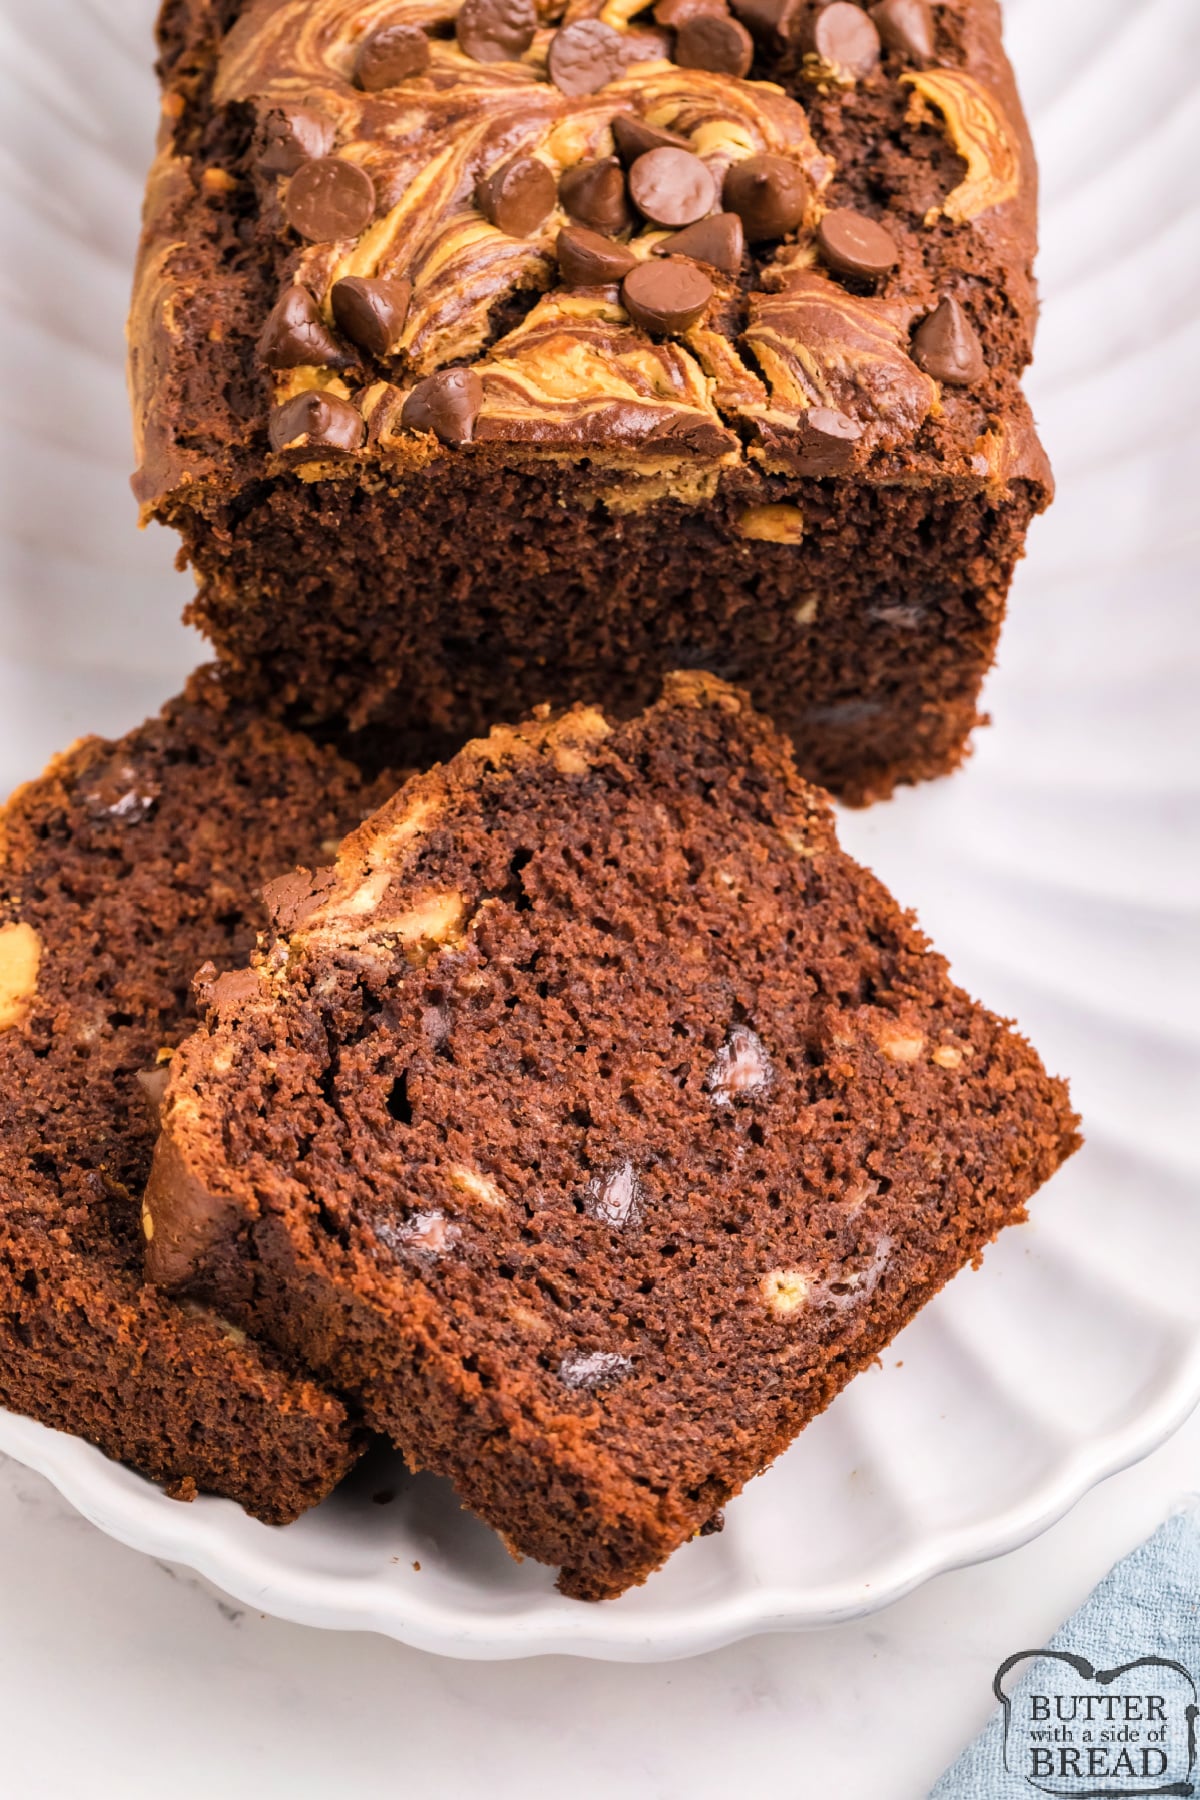 Chocolate banana bread made with peanut butter. 